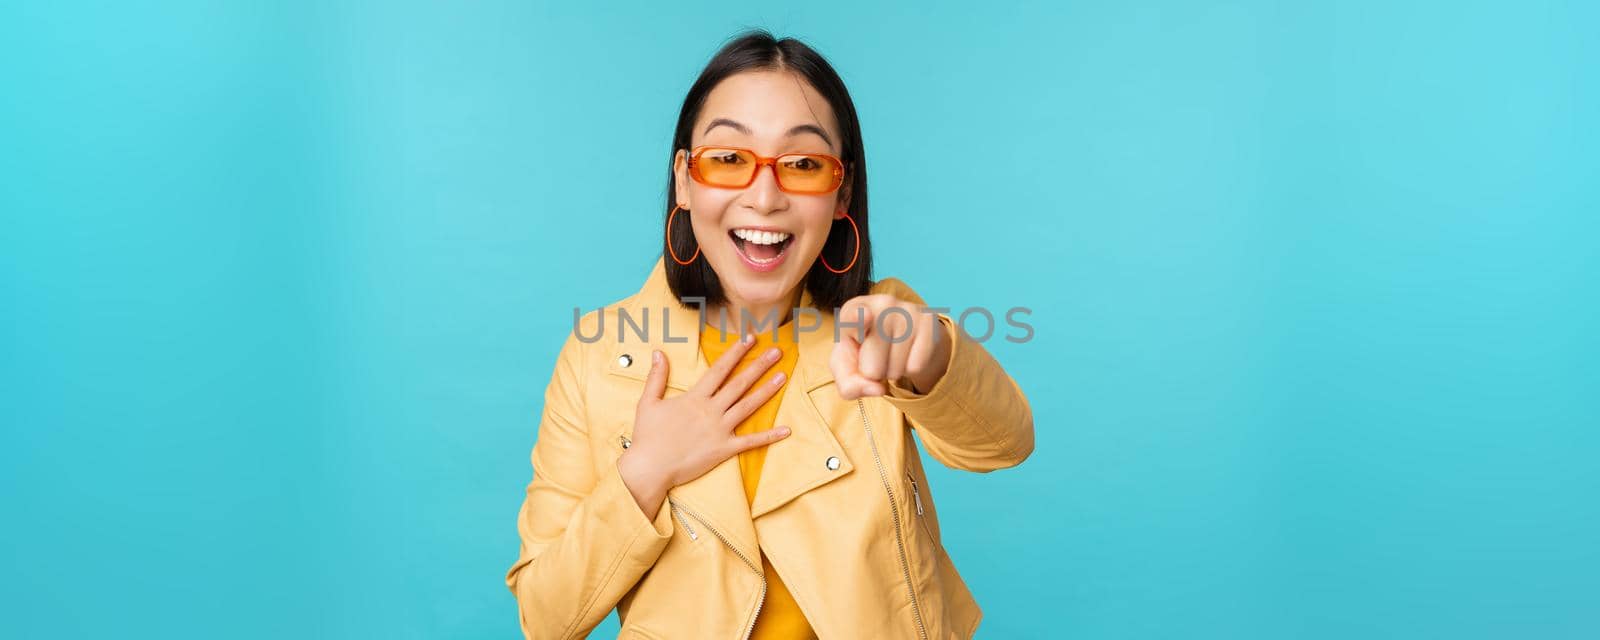 Image of happy korean woman in sunglasses, pointing finger at camera with amazed, surprised and joyful face expression, standing over blue background. Copy space